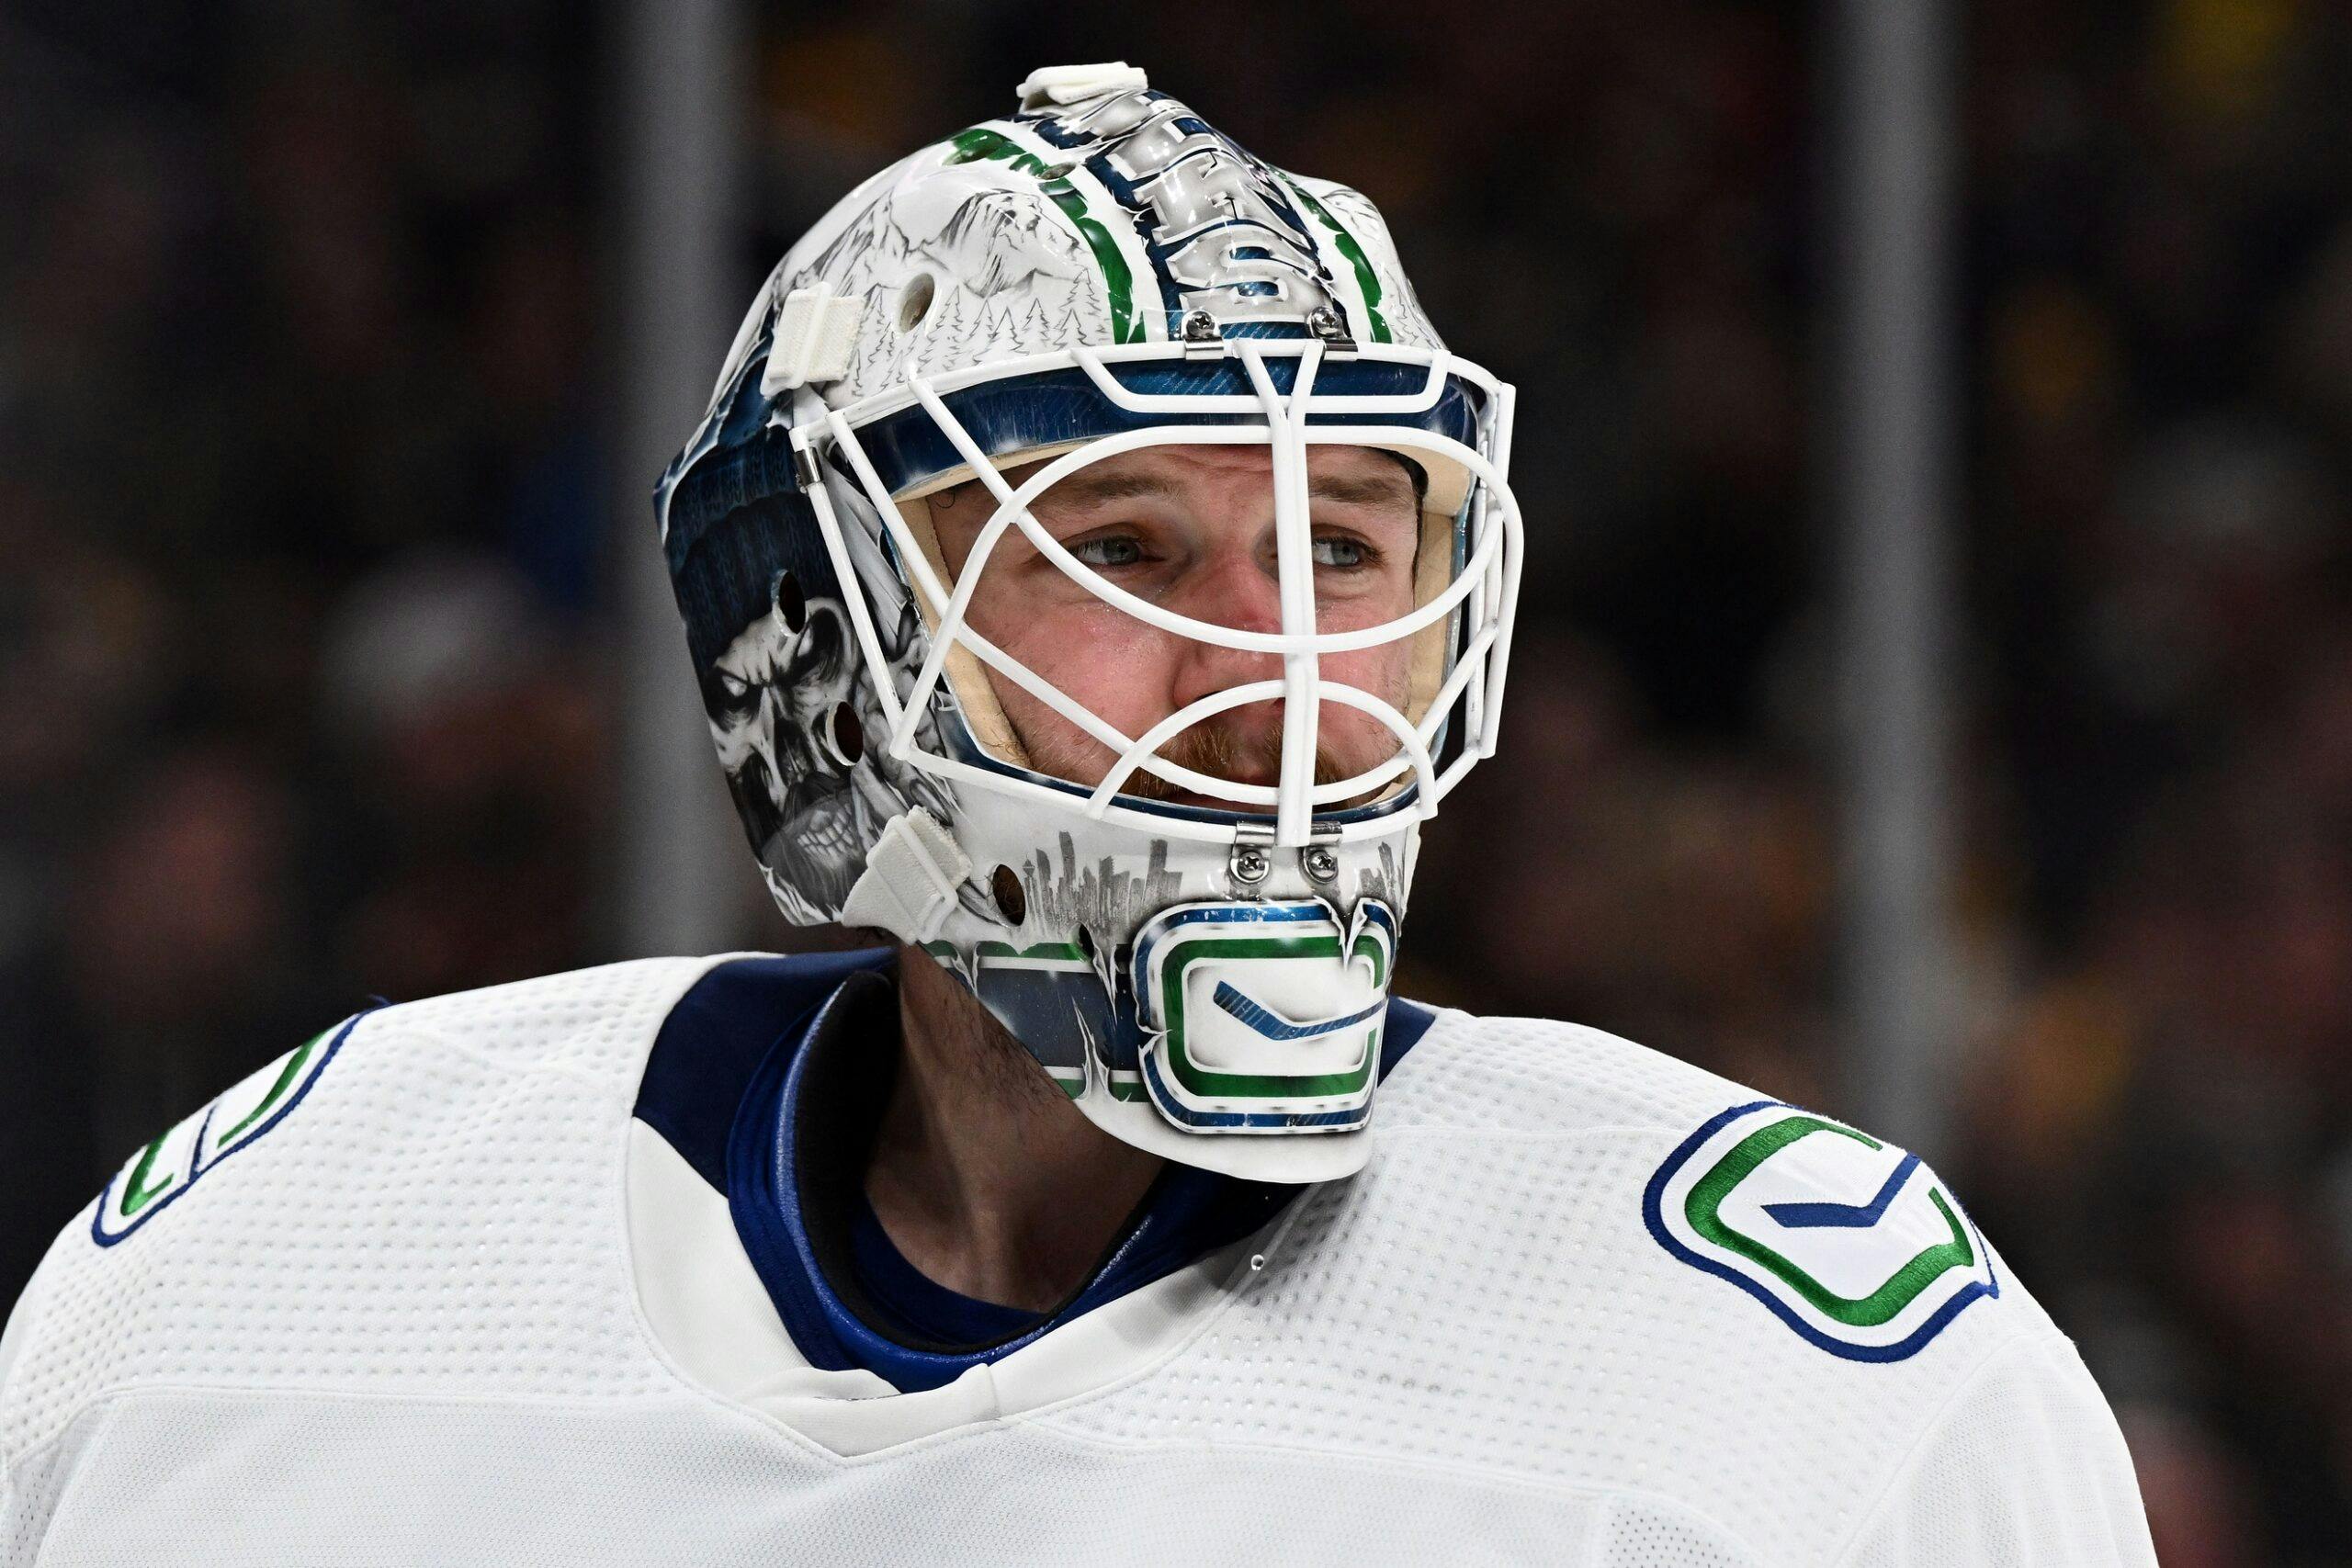 Vancouver Canucks’ Thatcher Demko denies trade rumors: ‘I have no idea where that started’